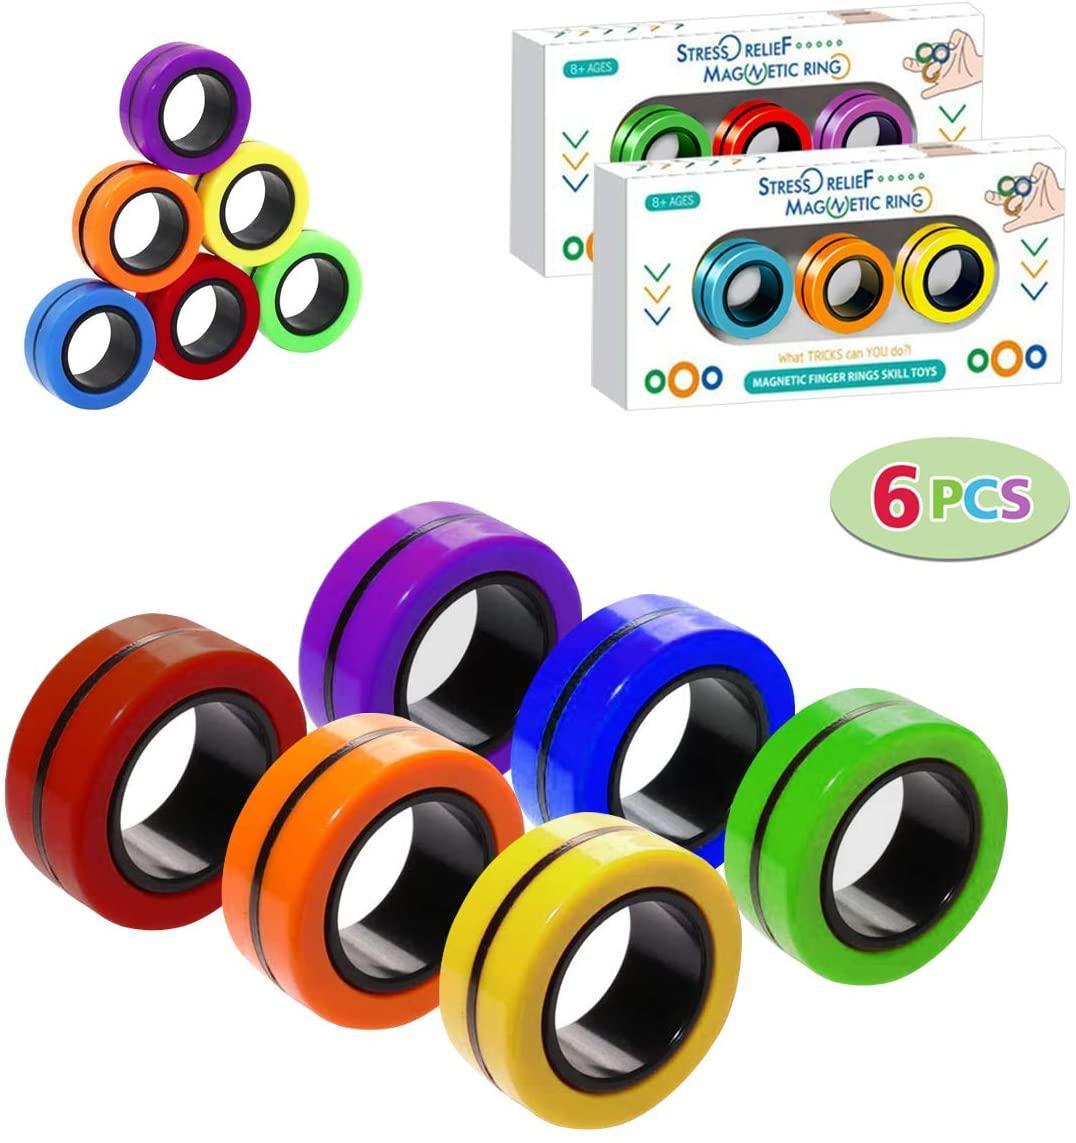 

DHL Finger Magnetic Rings Kids Decompression Fingertip Toys Magic Ring Props Tool for Autism ADHD Anxiety Relief Focus